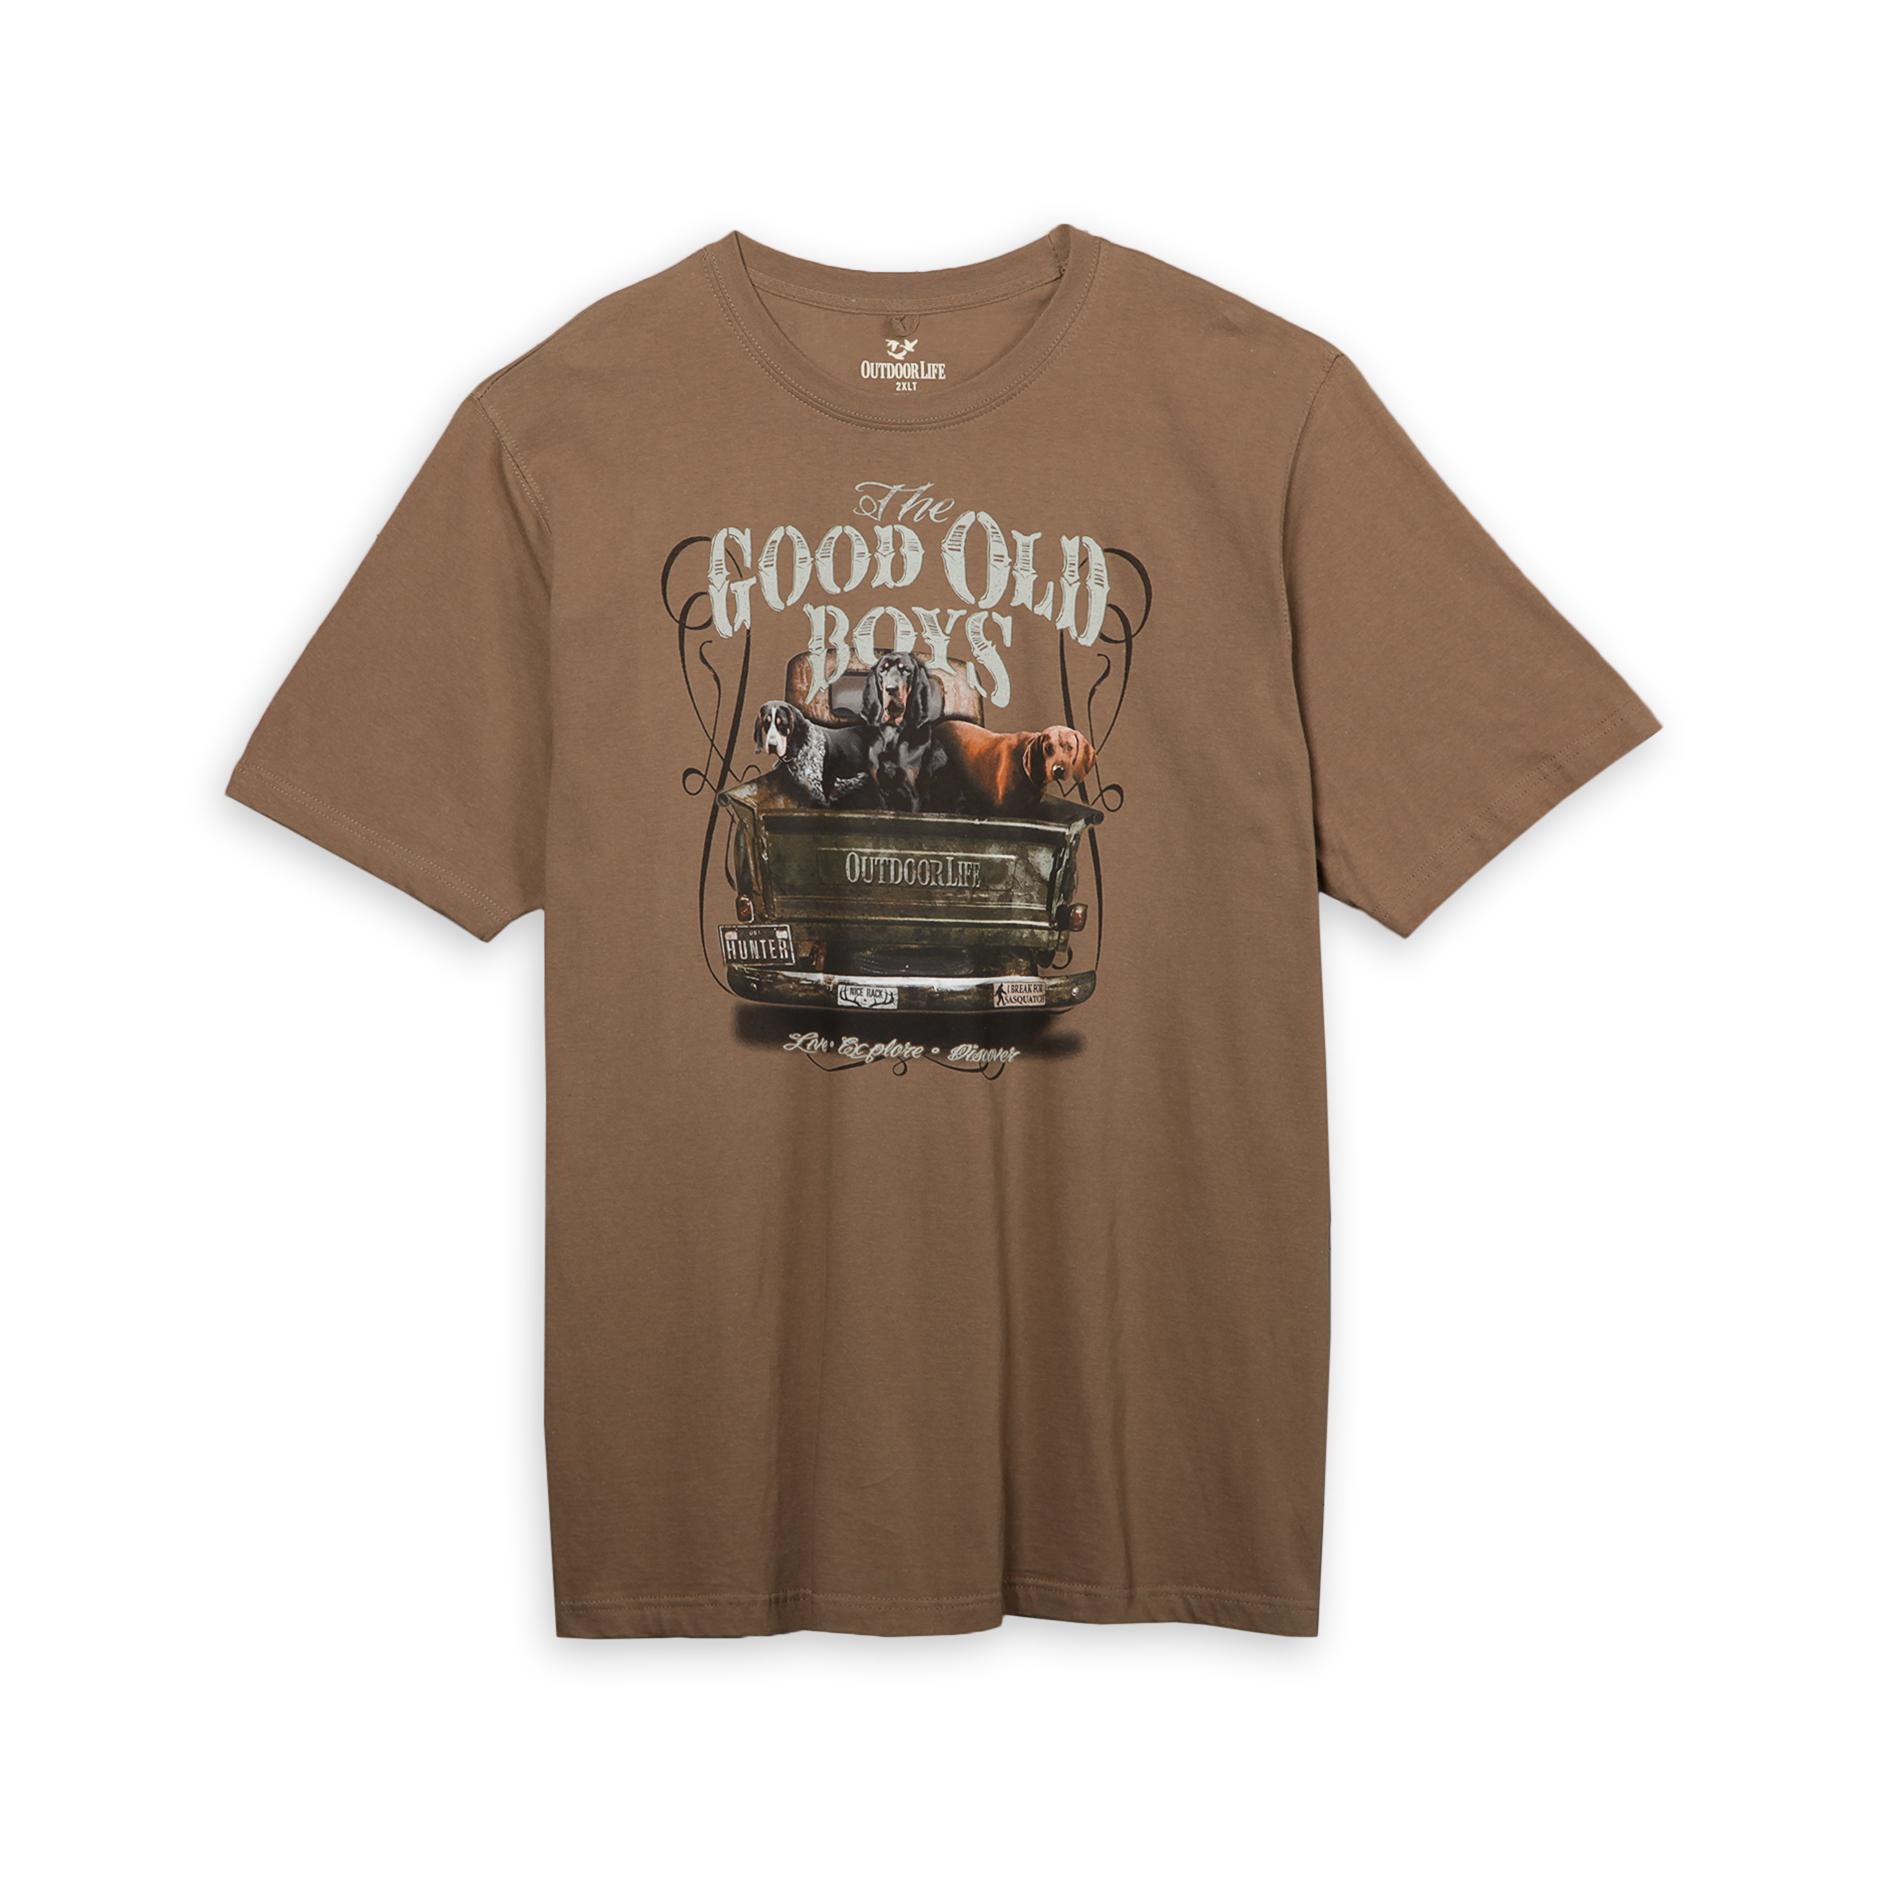 Outdoor Life Men's Big & Tall Graphic T-Shirt - Truck & Dogs